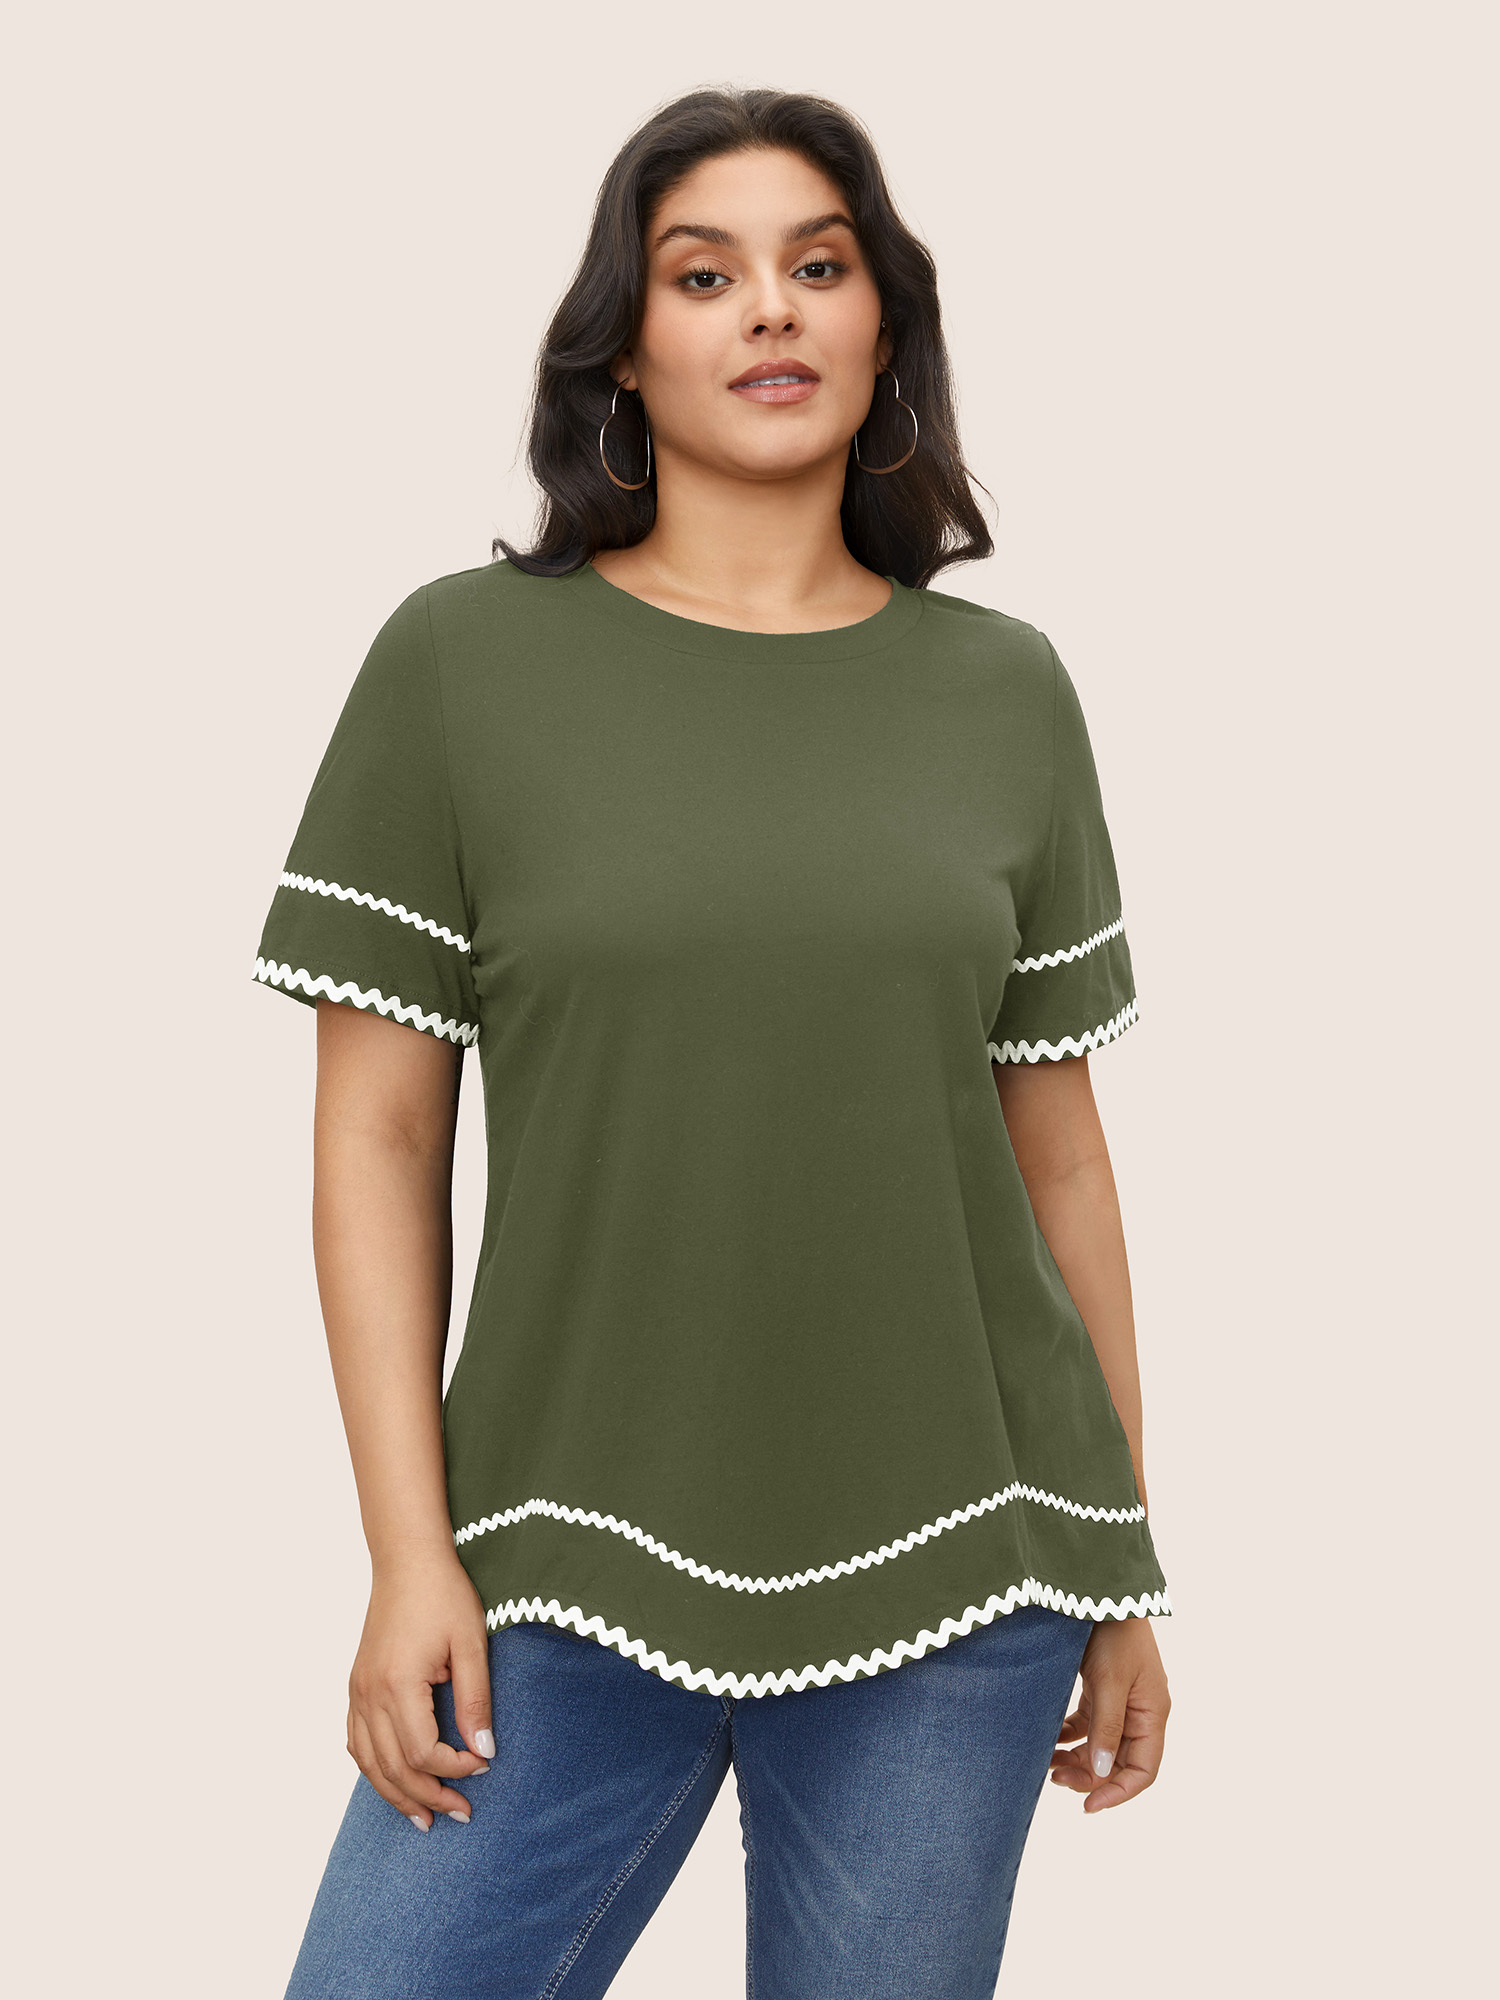 

Plus Size Cotton Contrast Trim Round Neck T-shirt ArmyGreen Women Casual Contrast Round Neck Everyday T-shirts BloomChic